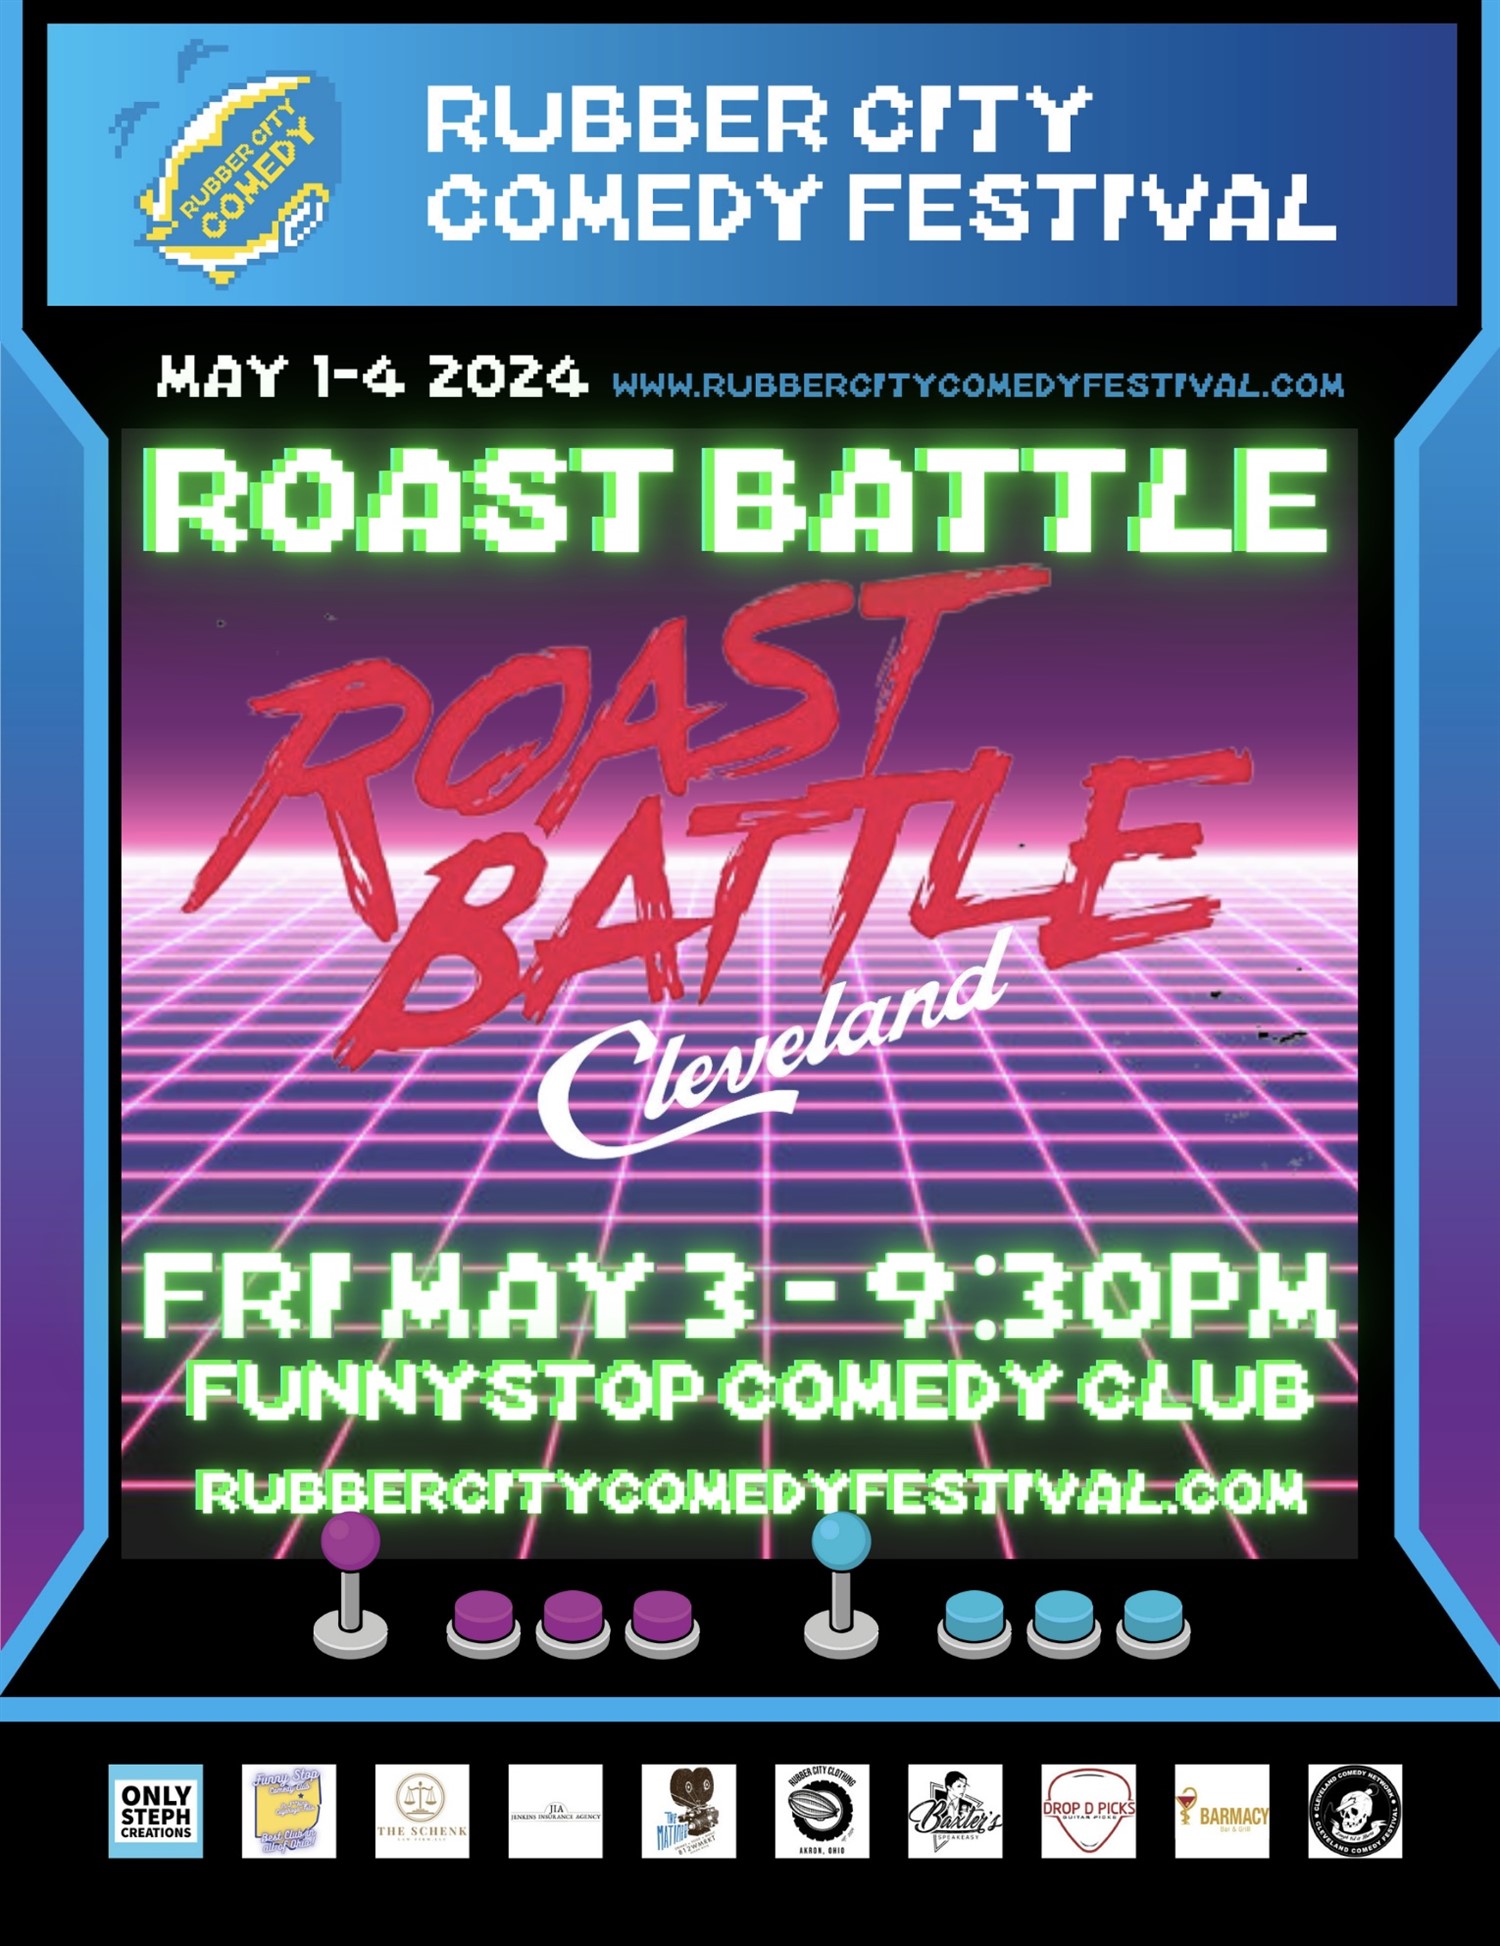 ROAST BATTLE CLEVELAND | 9:30 PM | Rubber City Comedy Festival Funny Stop Comedy Club on May 03, 21:30@Funny Stop Comedy Club - Buy tickets and Get information on Funny Stop funnystop.online